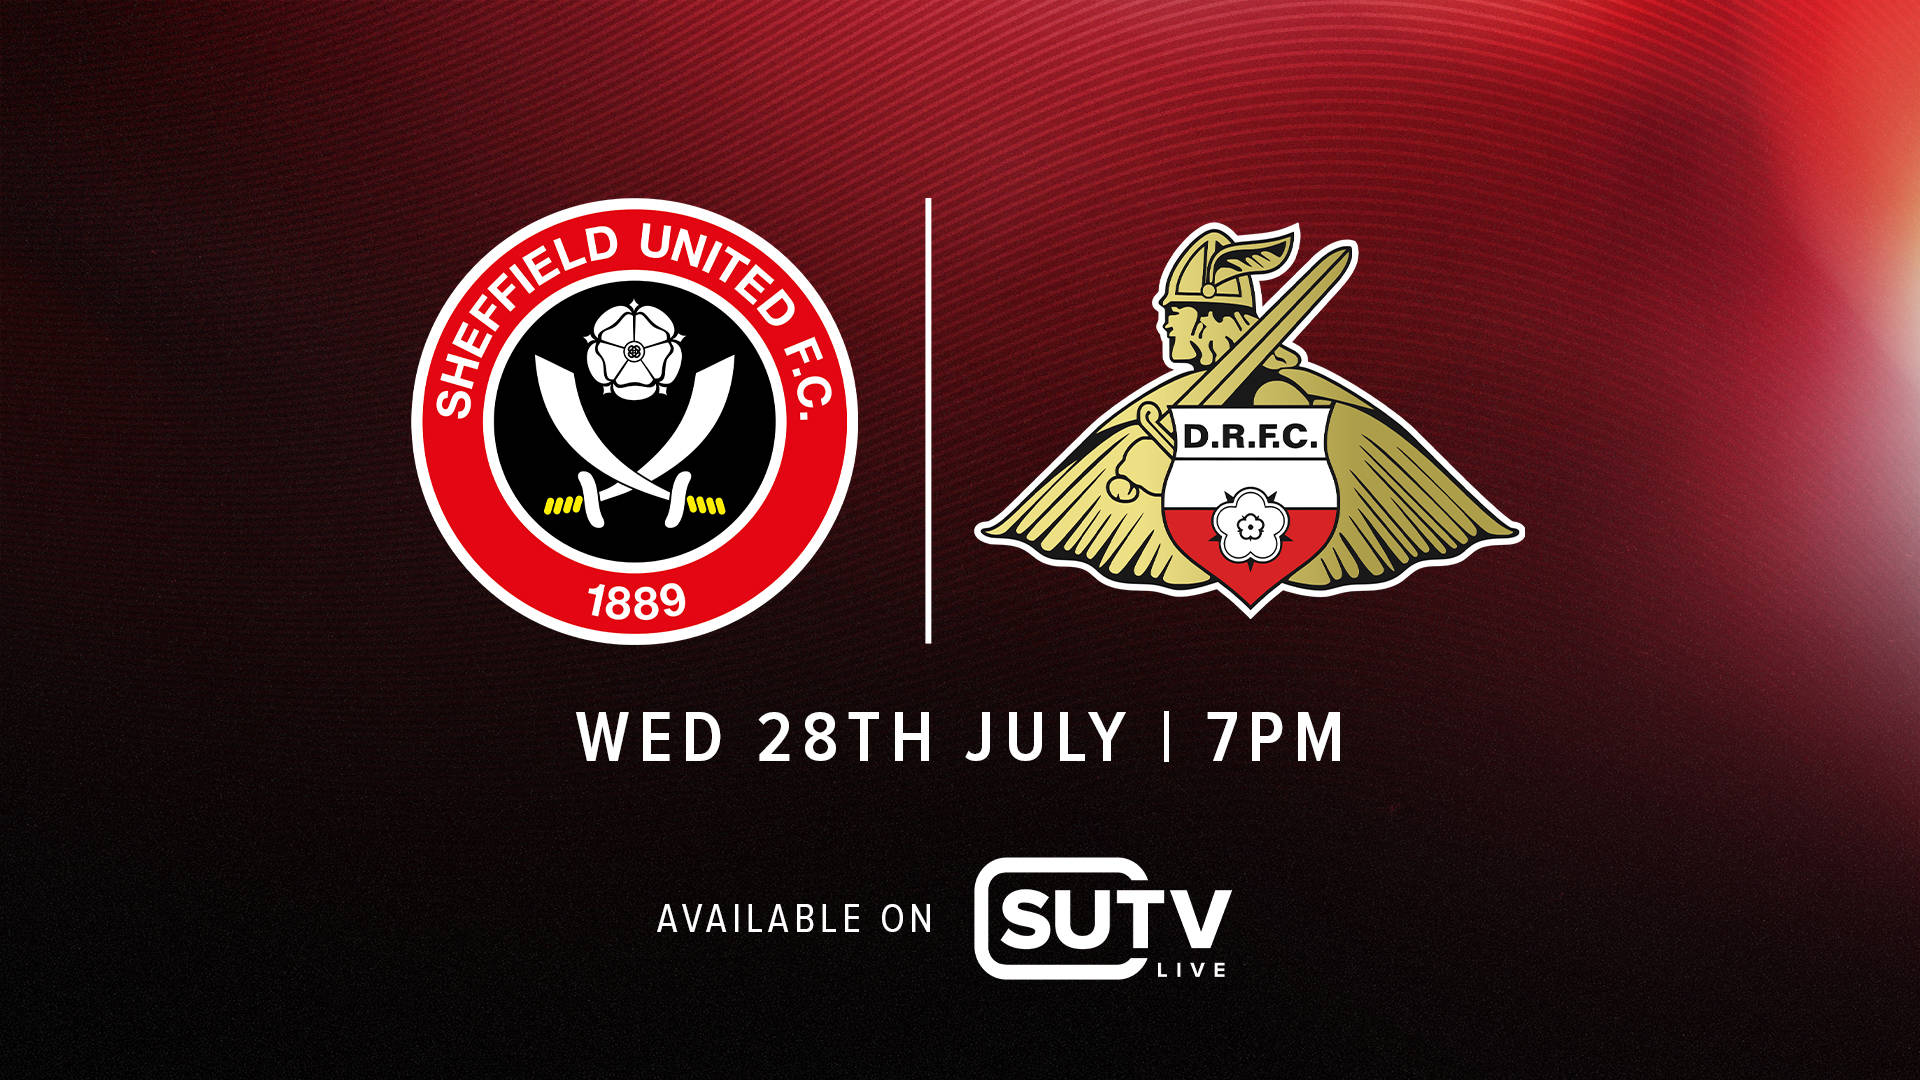 Sheffield United Vs Doncaster Rovers